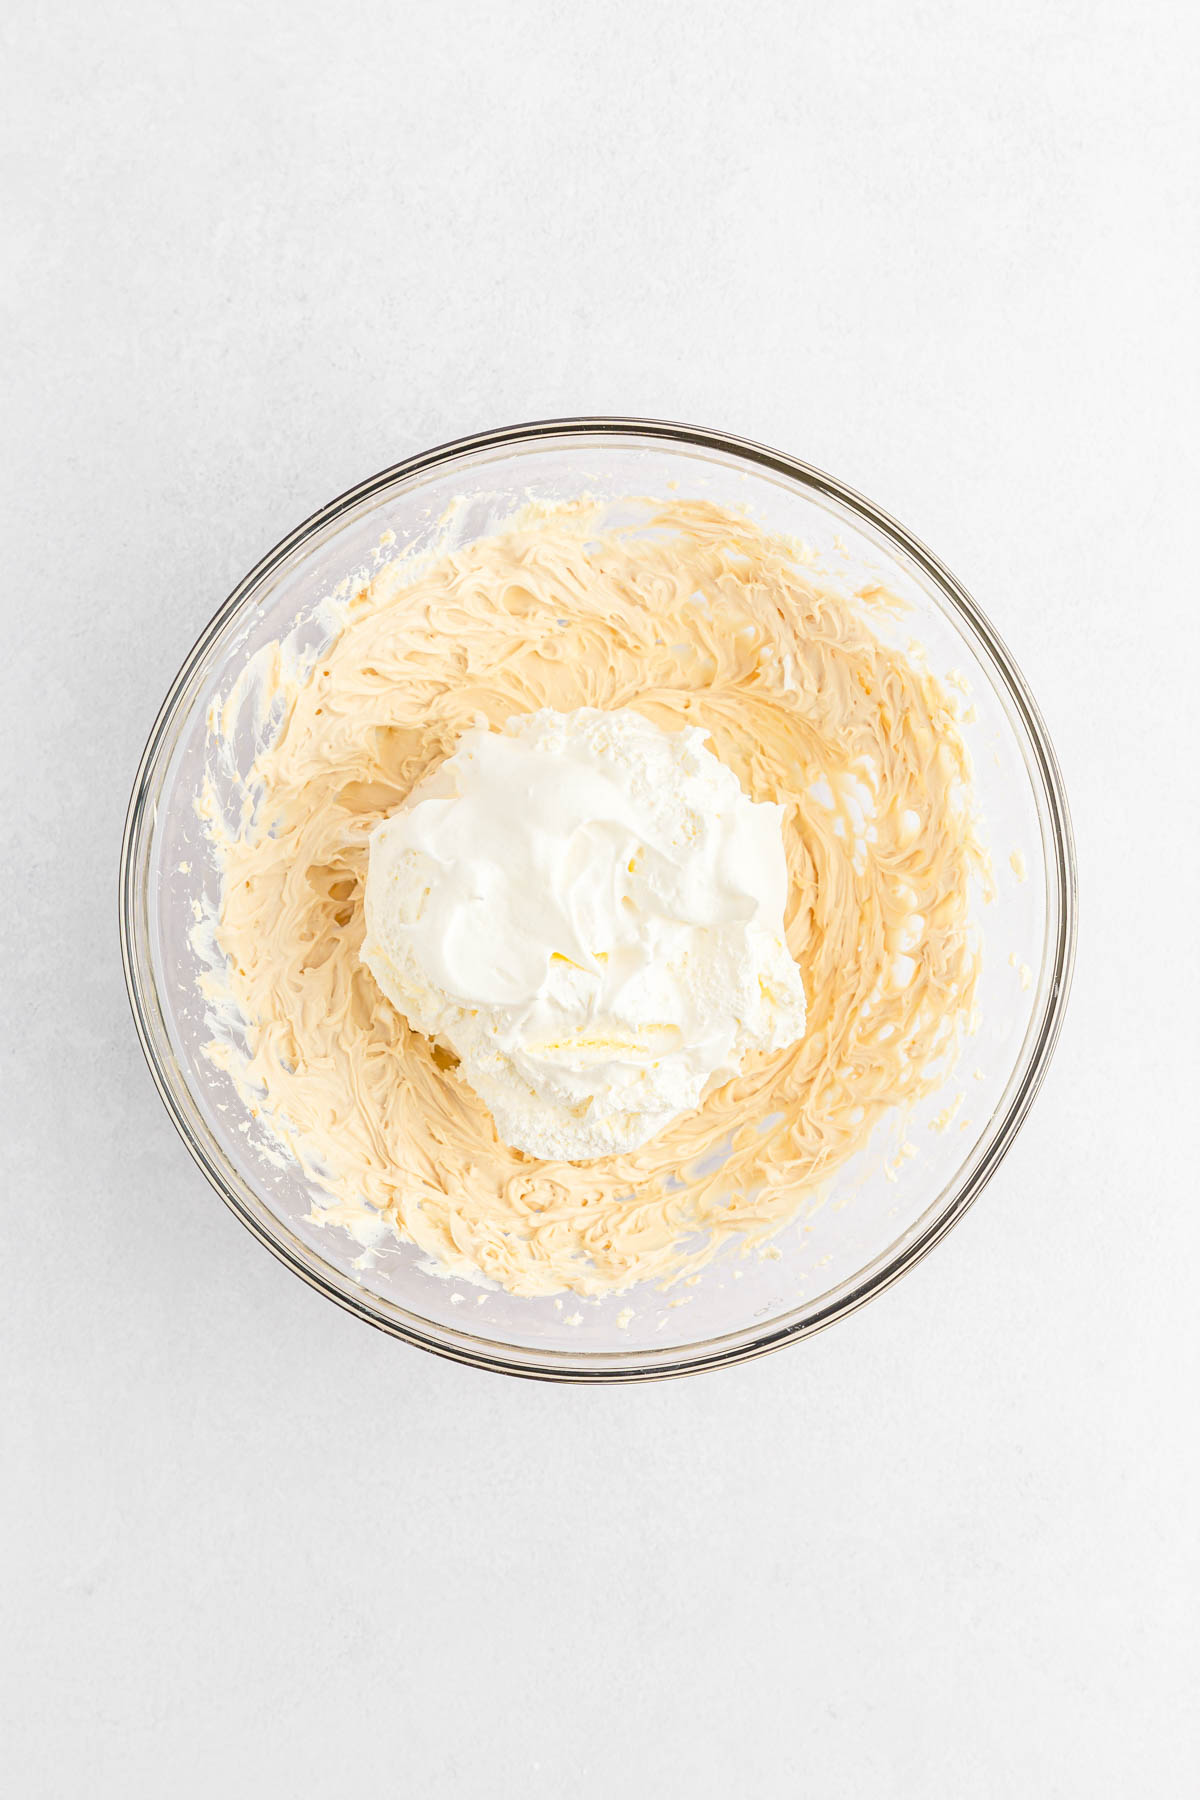 Whipped cream with cream cheese mixture